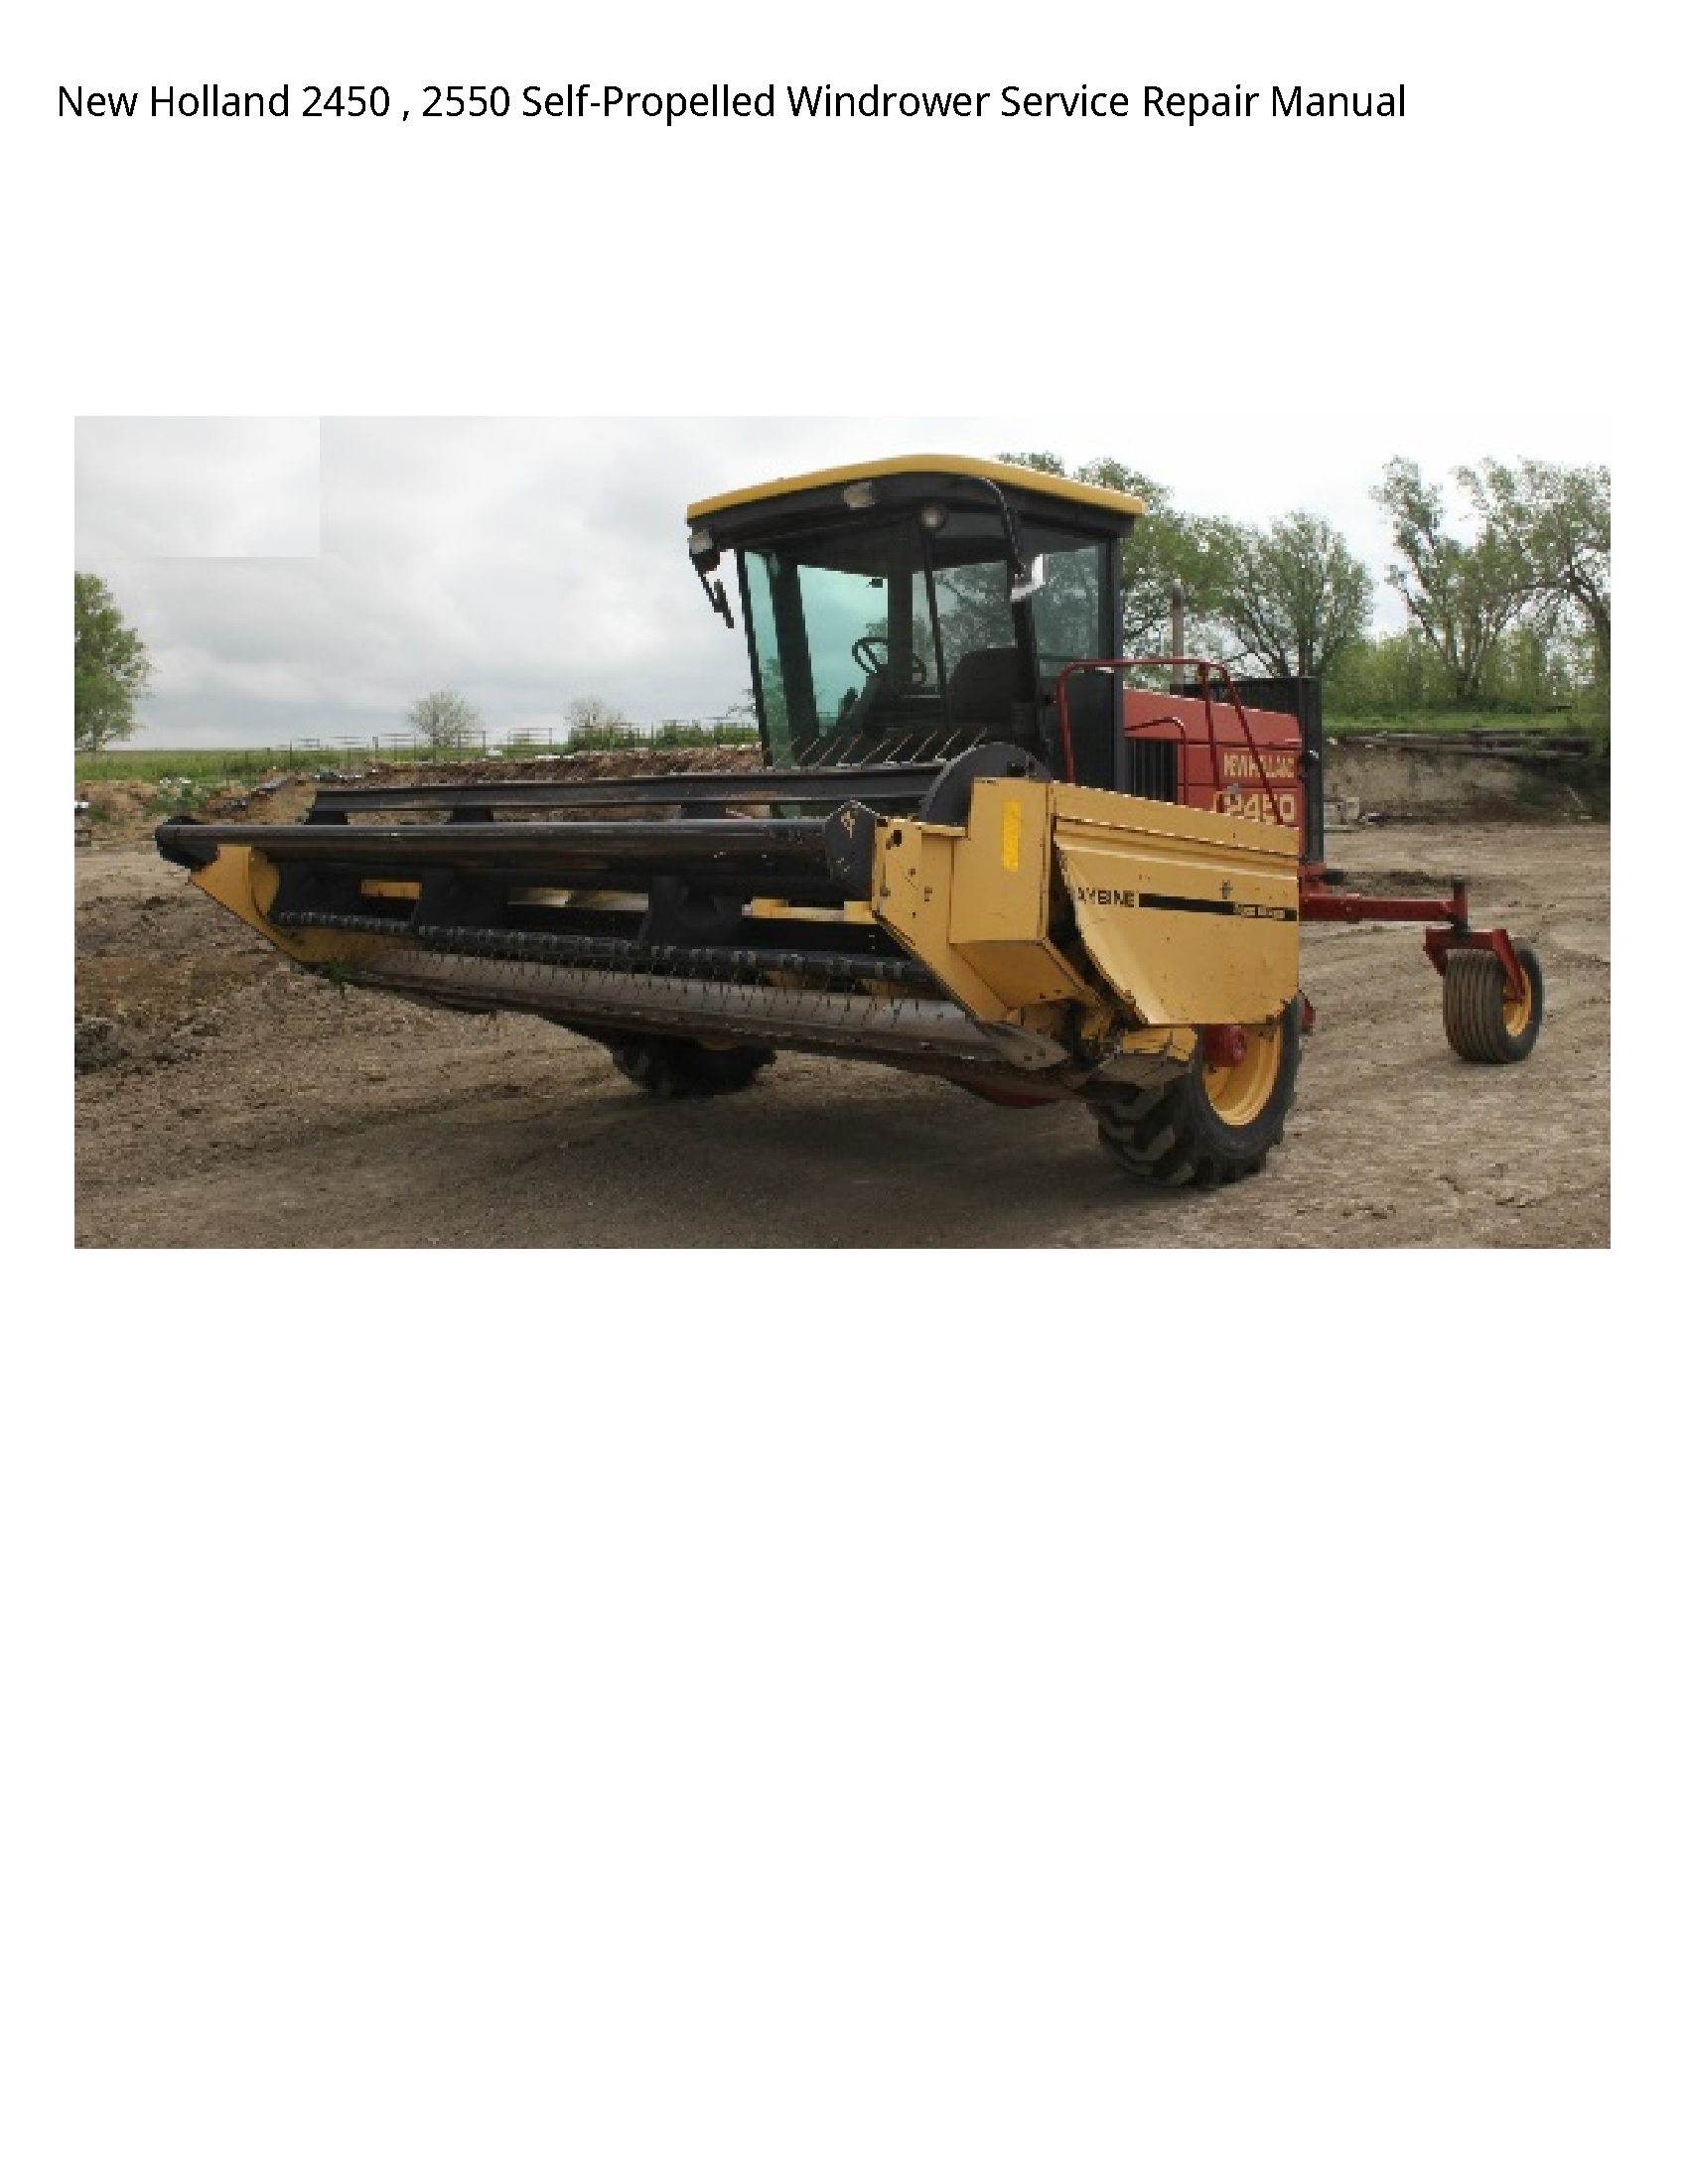 New Holland 2450 Self-Propelled Windrower manual